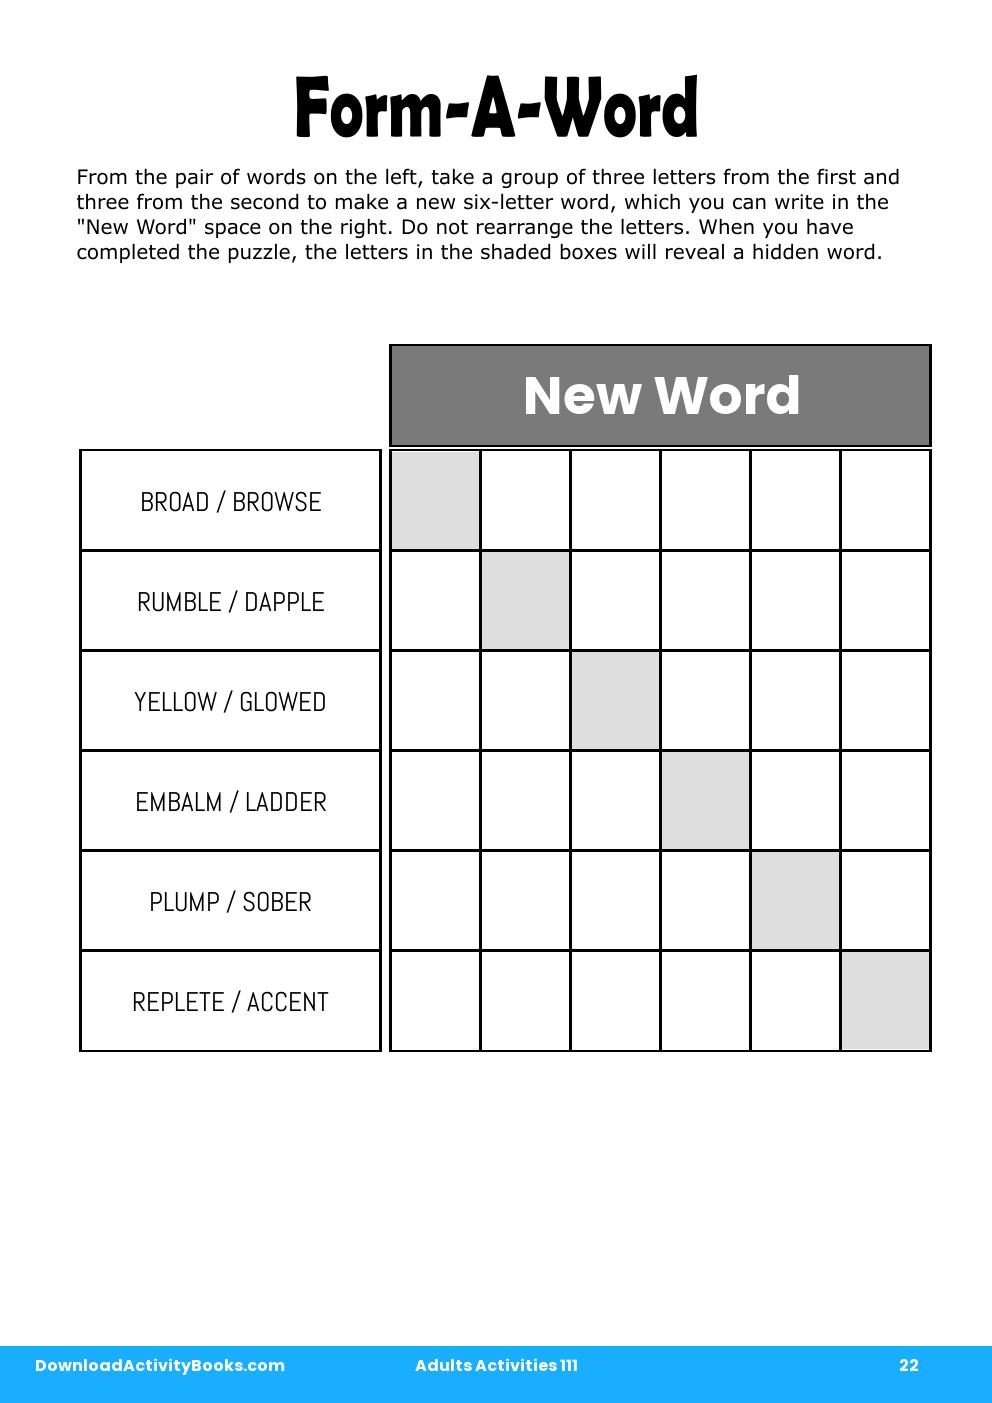 Form-A-Word in Adults Activities 111